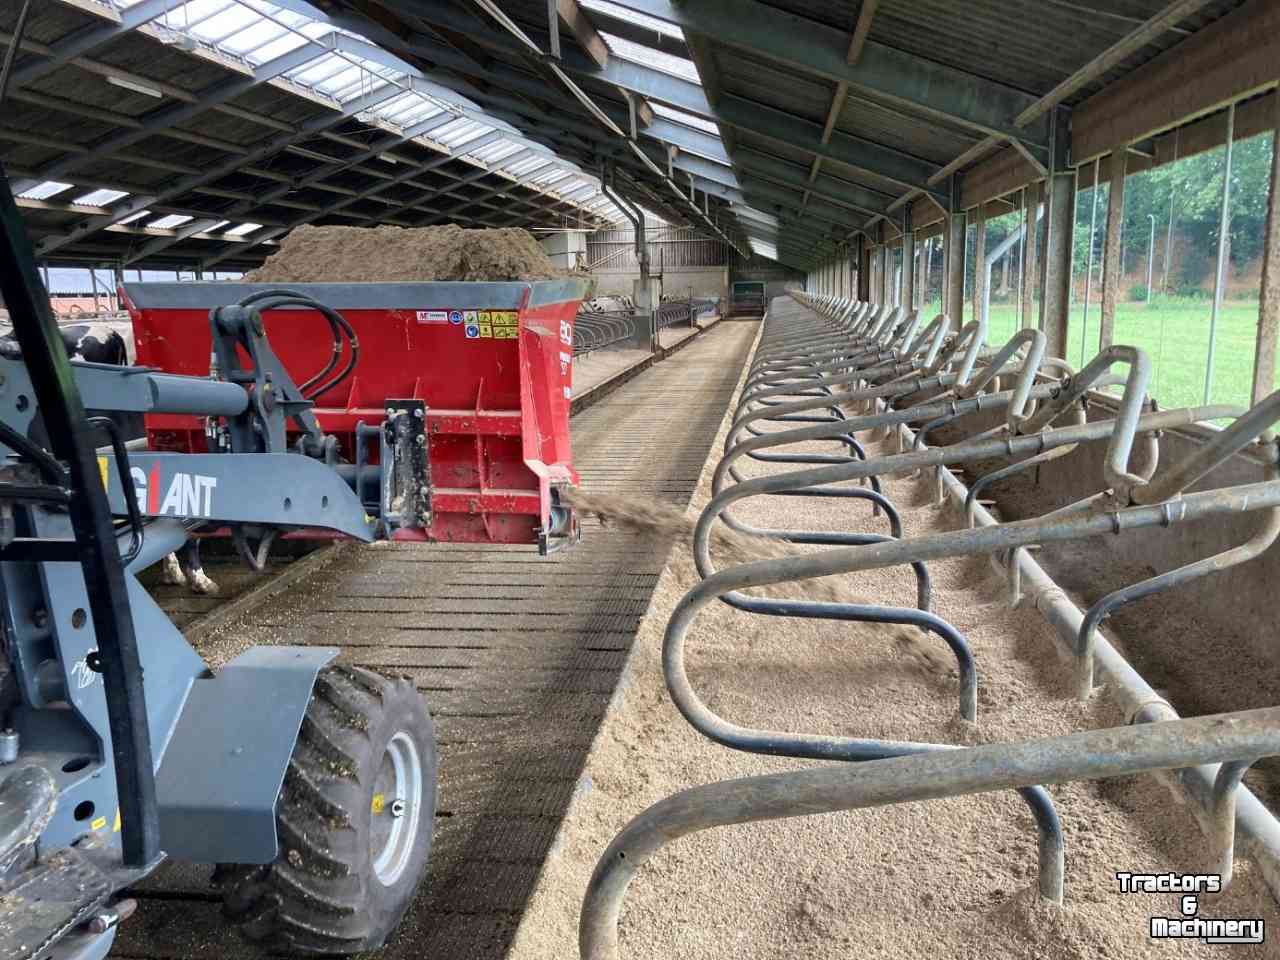 Sawdust spreader for boxes AG Hybrid-MKII (Boxenstrooier, zaagsel, strooier, instrooier, diepstrooisel)